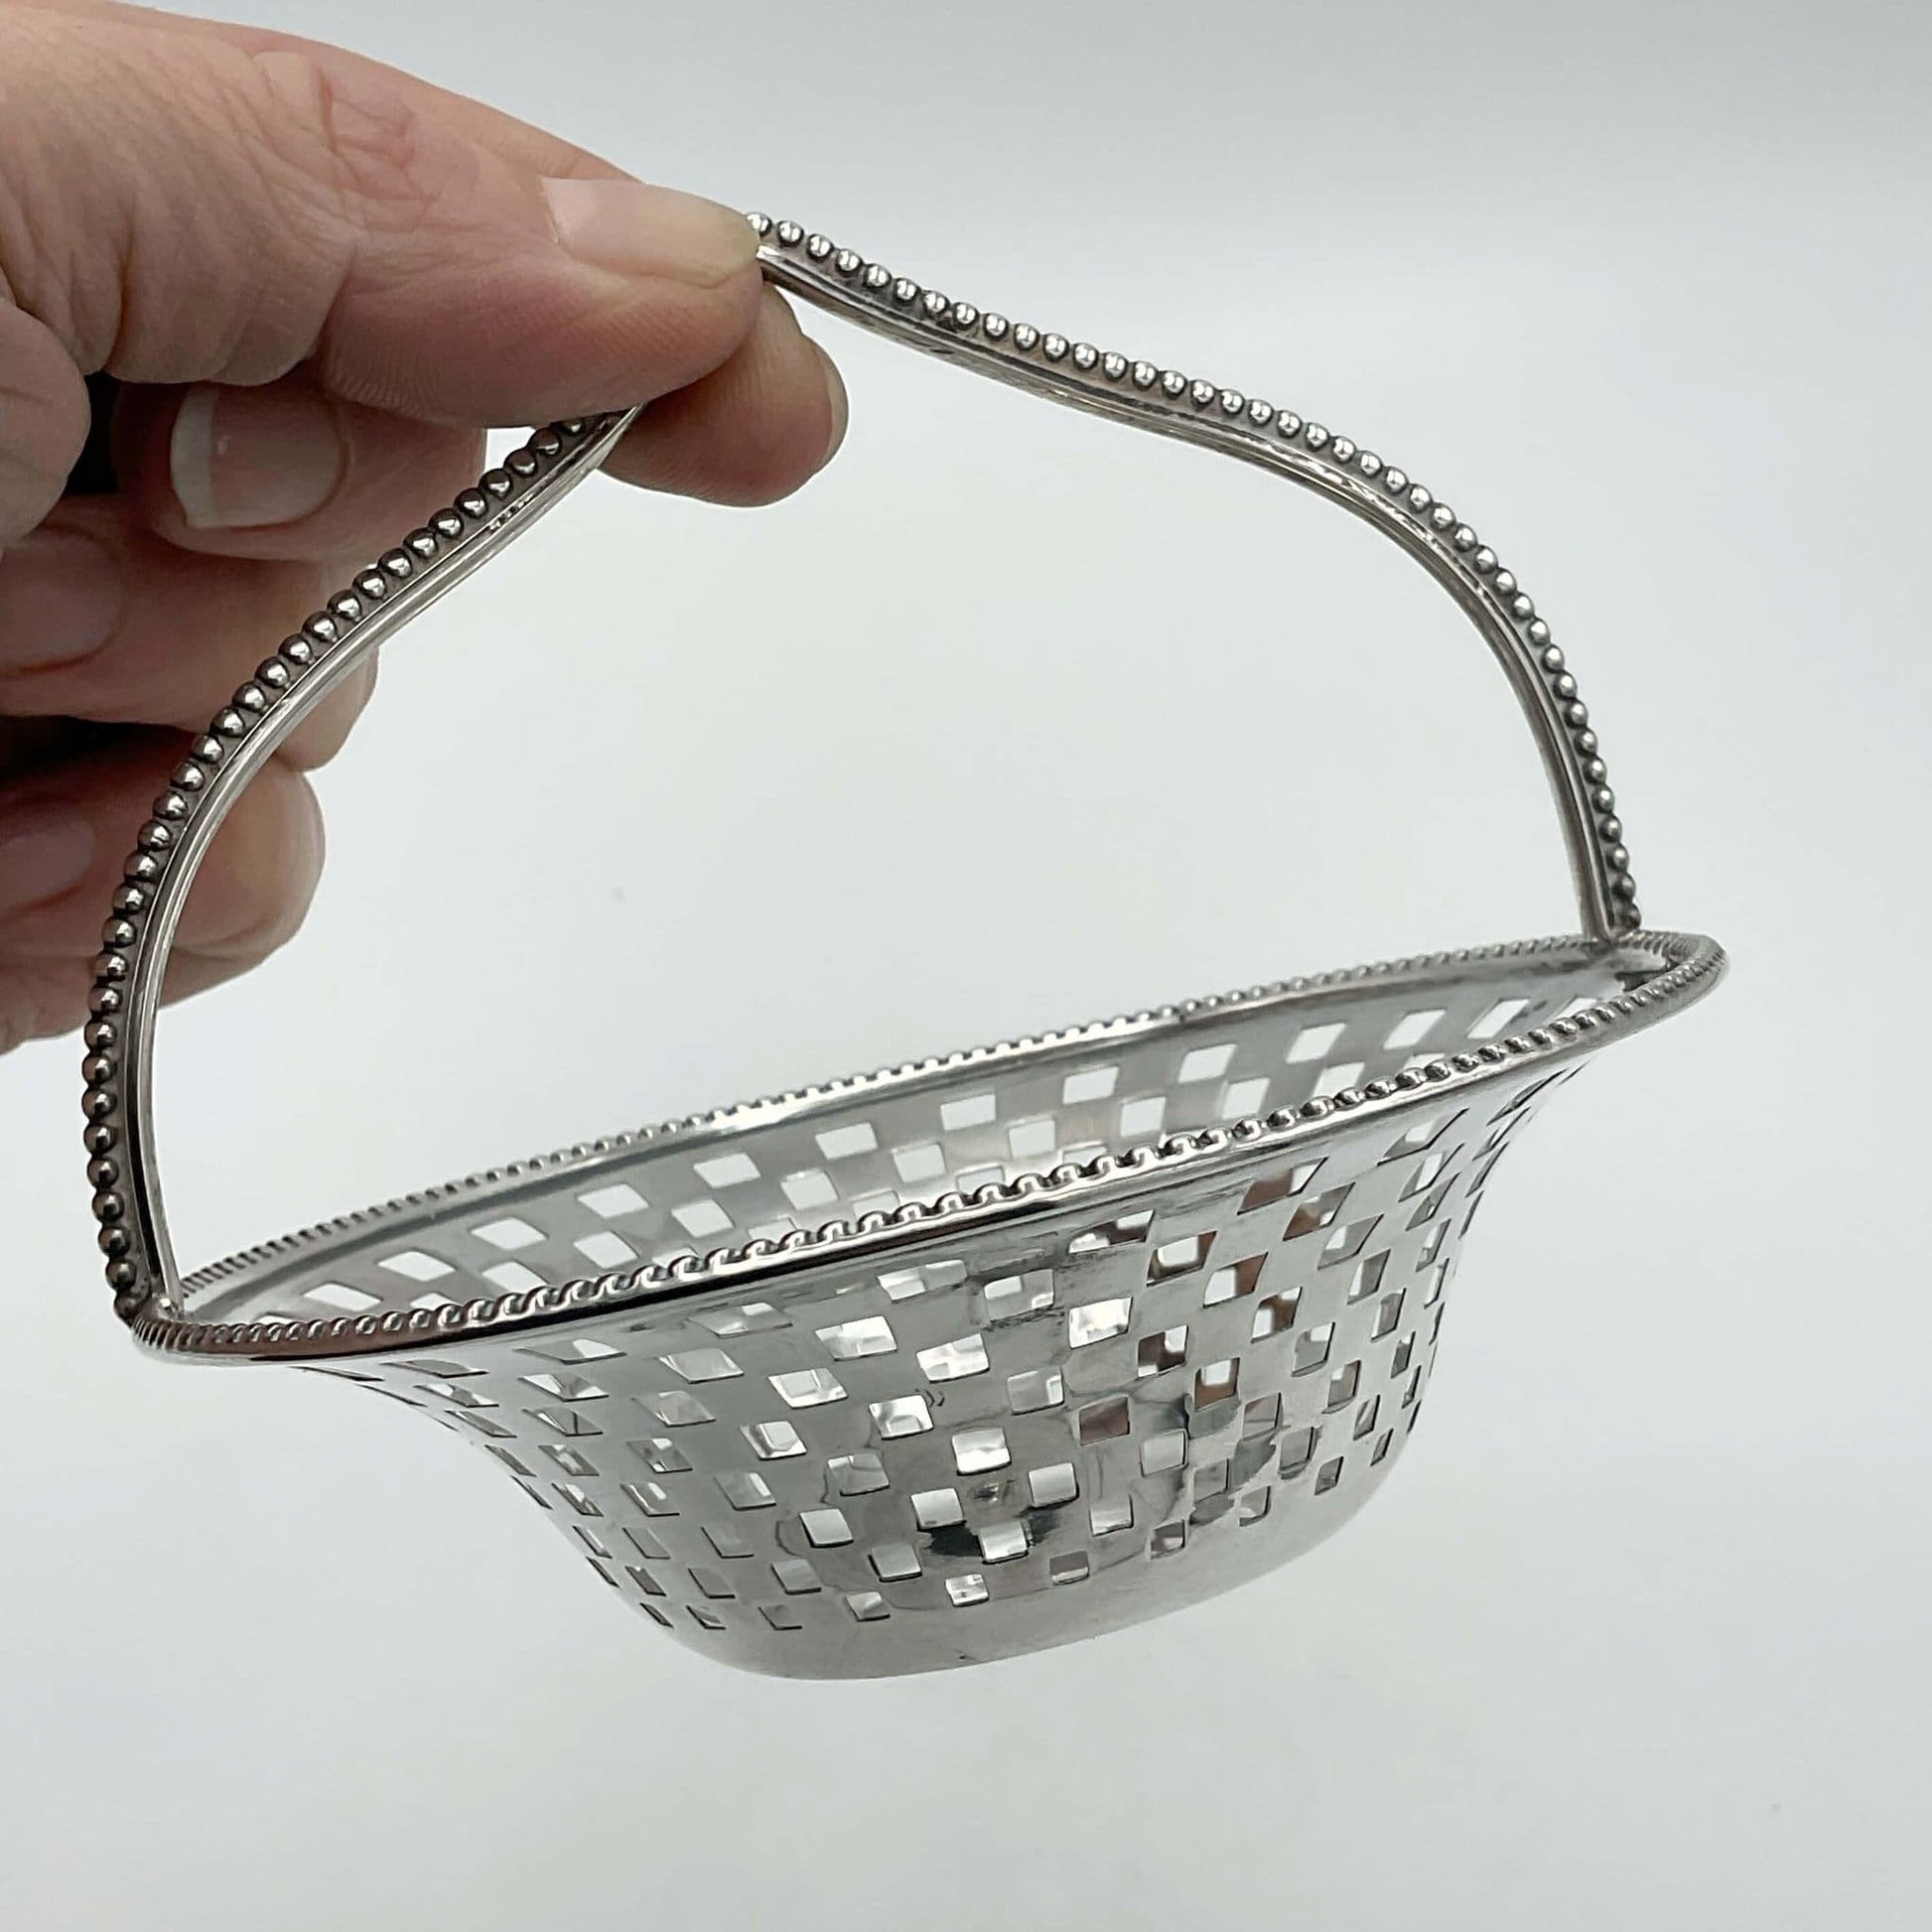 Antique Silver Basket with handle held by fingers showing pierced side on white background